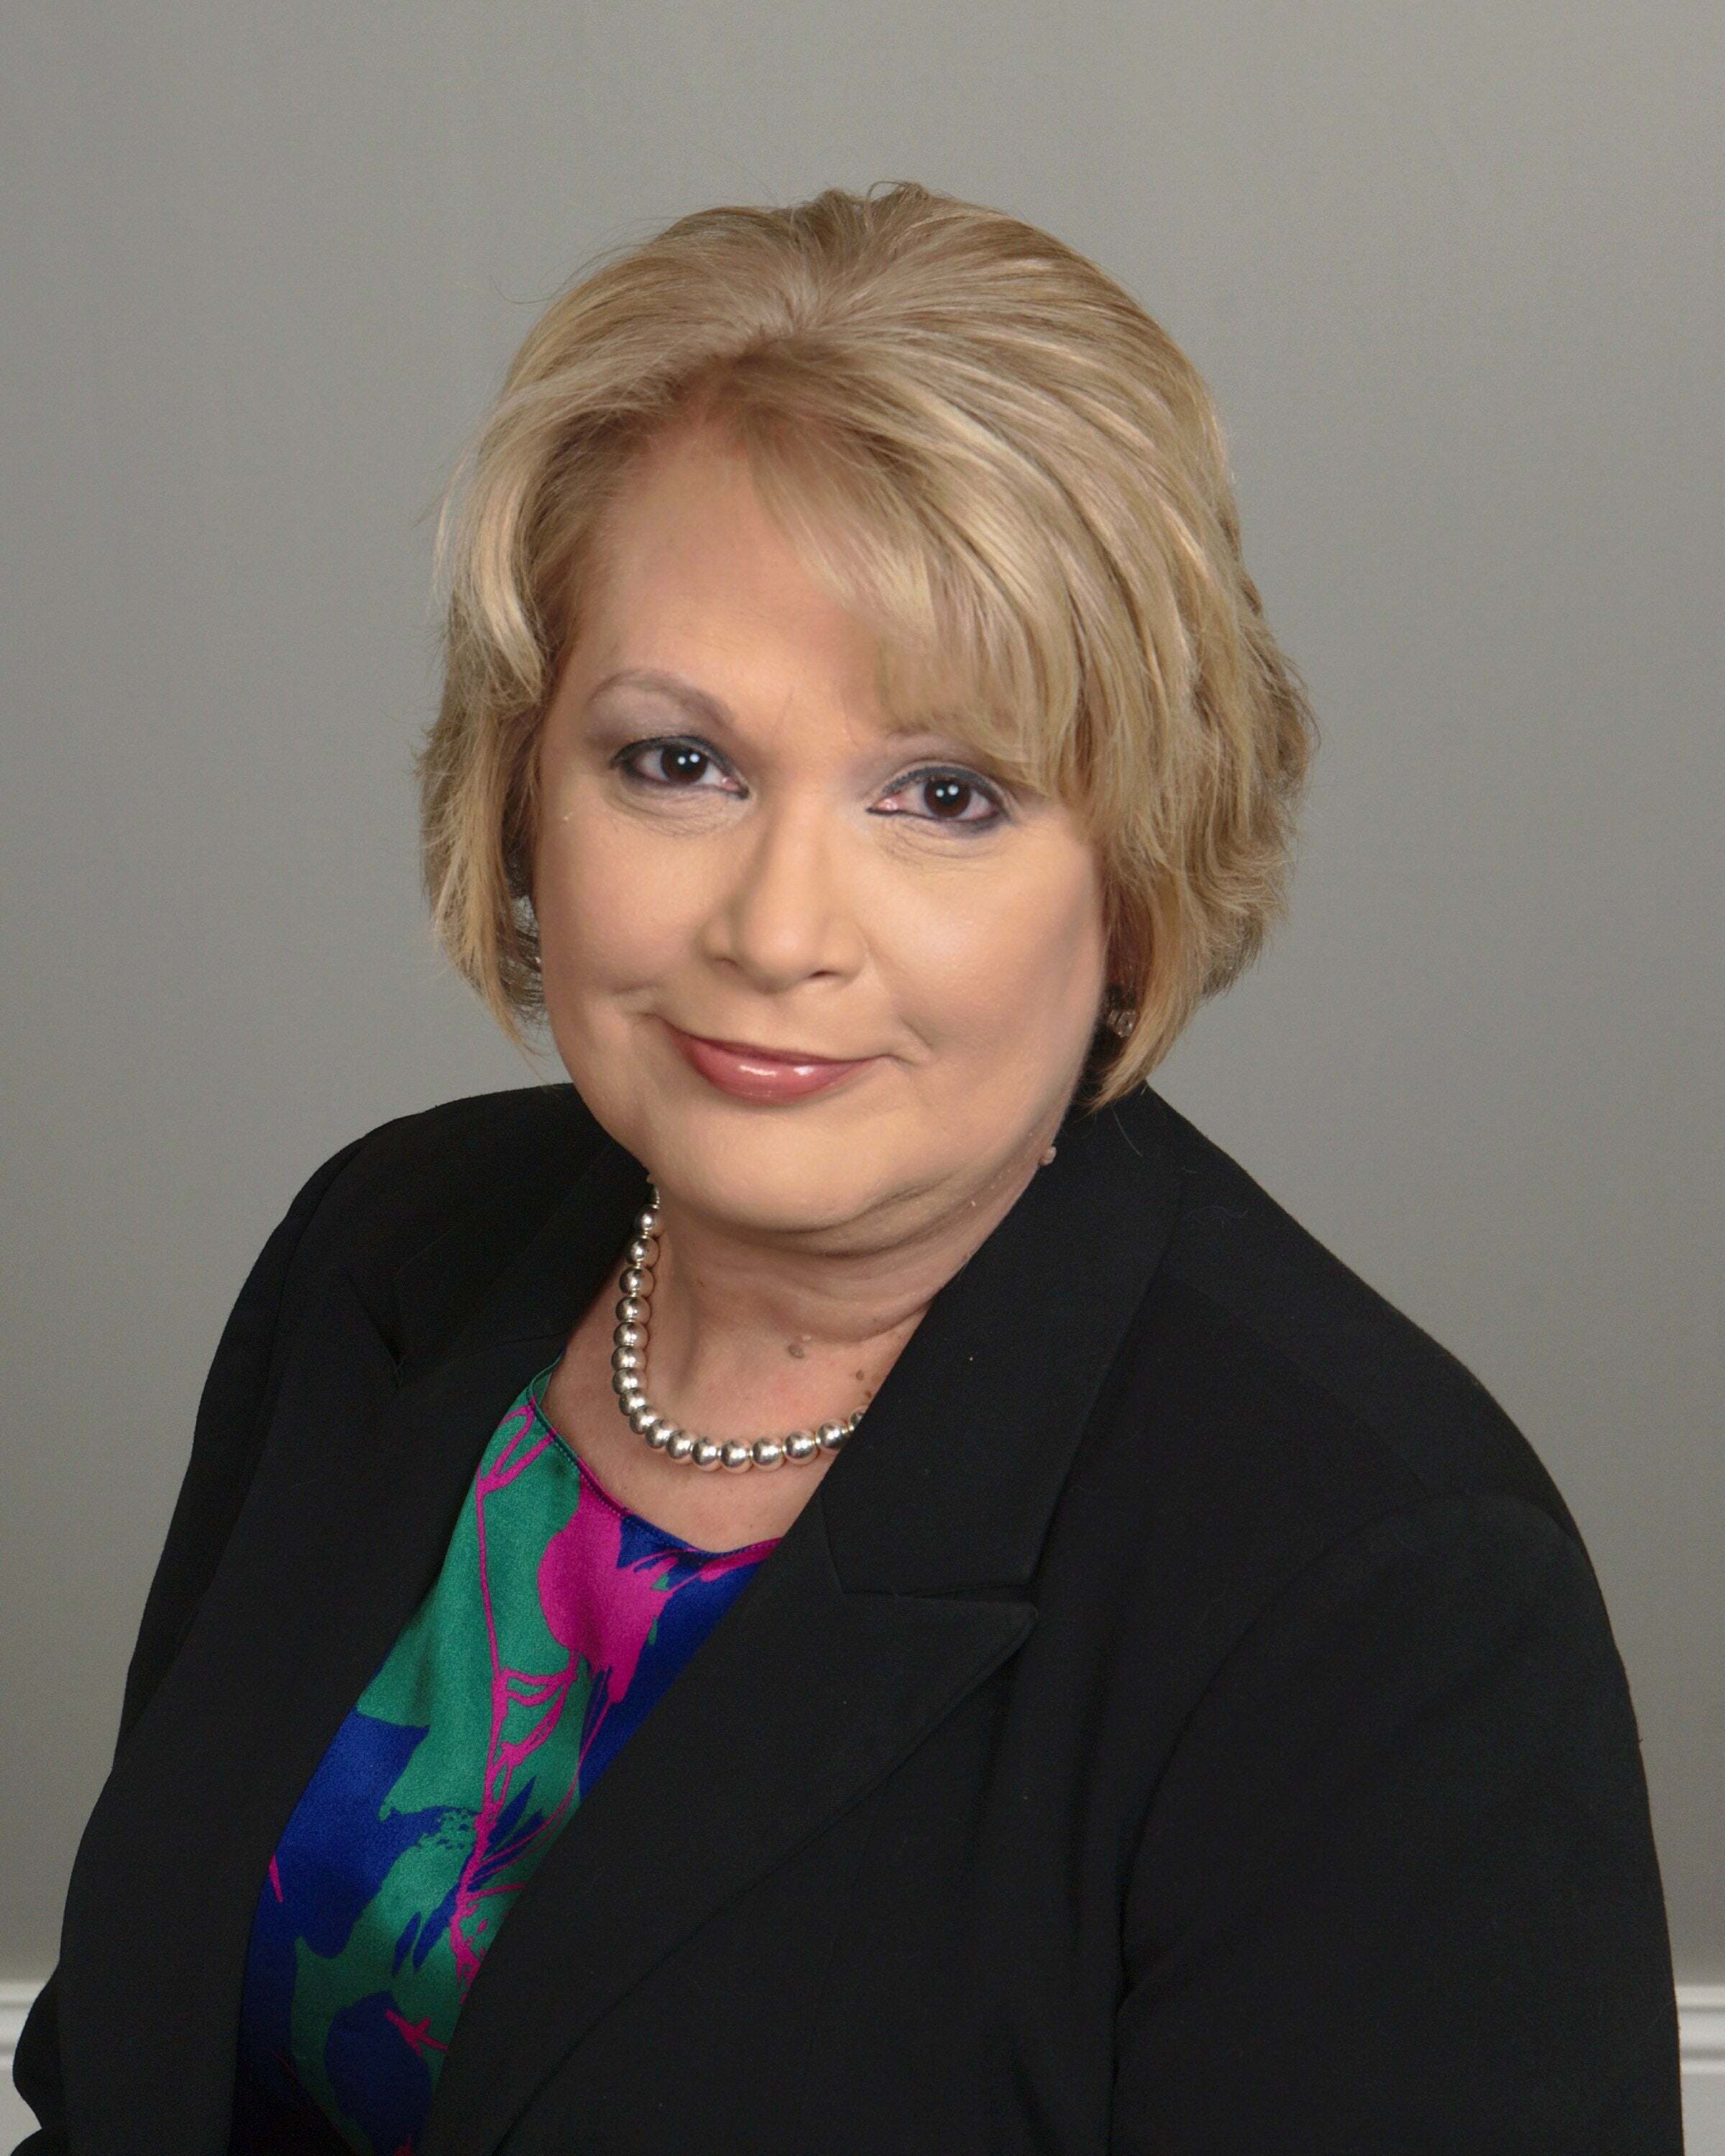 Connie Brown, Real Estate Salesperson in Chattanooga, Pryor Realty, Inc.